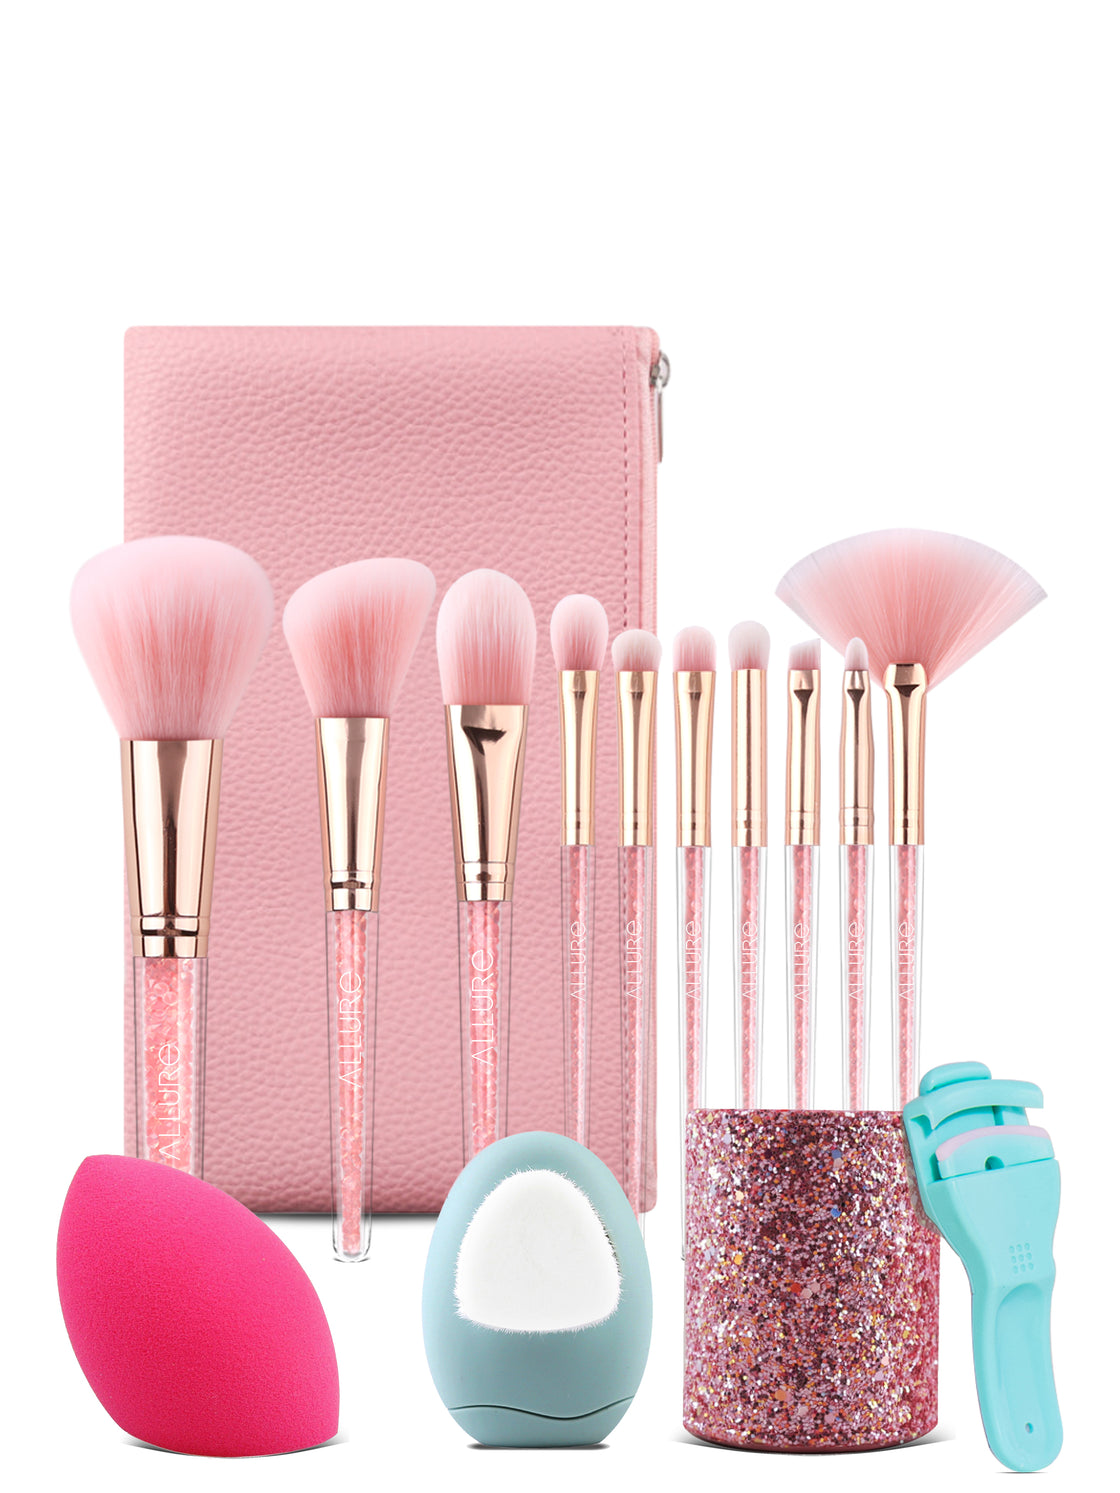 Gift Set Contains 10 Pc Makeup Brush Set & Other Essential Makeup Tools-3